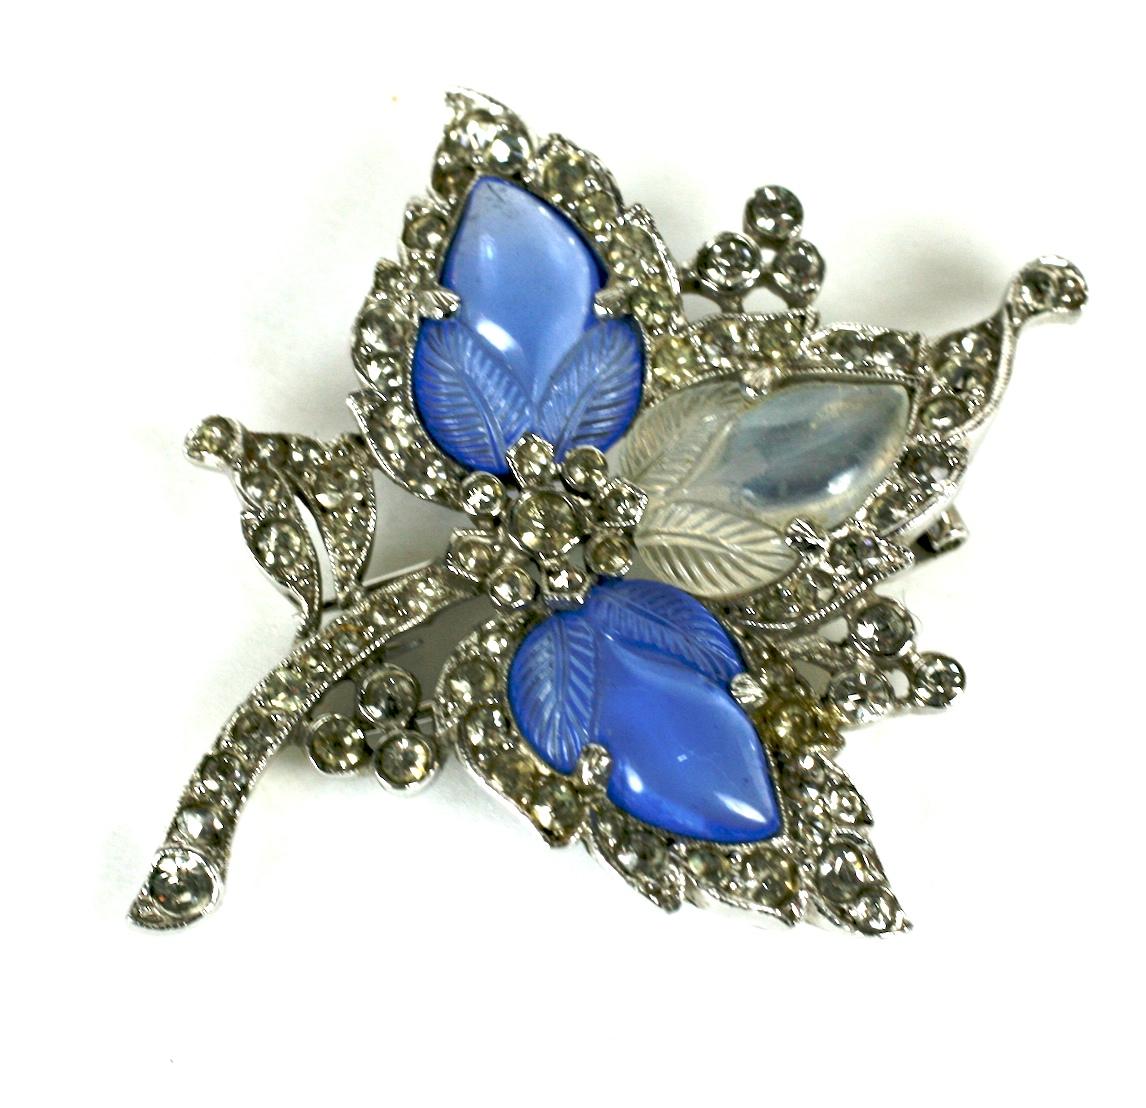 Trifari Alfred Philippe pale sapphire and moonstone fruit salad trefoil ivy leaf fur clip of rhodium plate base metal, molded  hand finished glass fruit salad stones and crystal rhinestones.
Marked: Trifari with Crown, Des Pat No 125841
Designer A